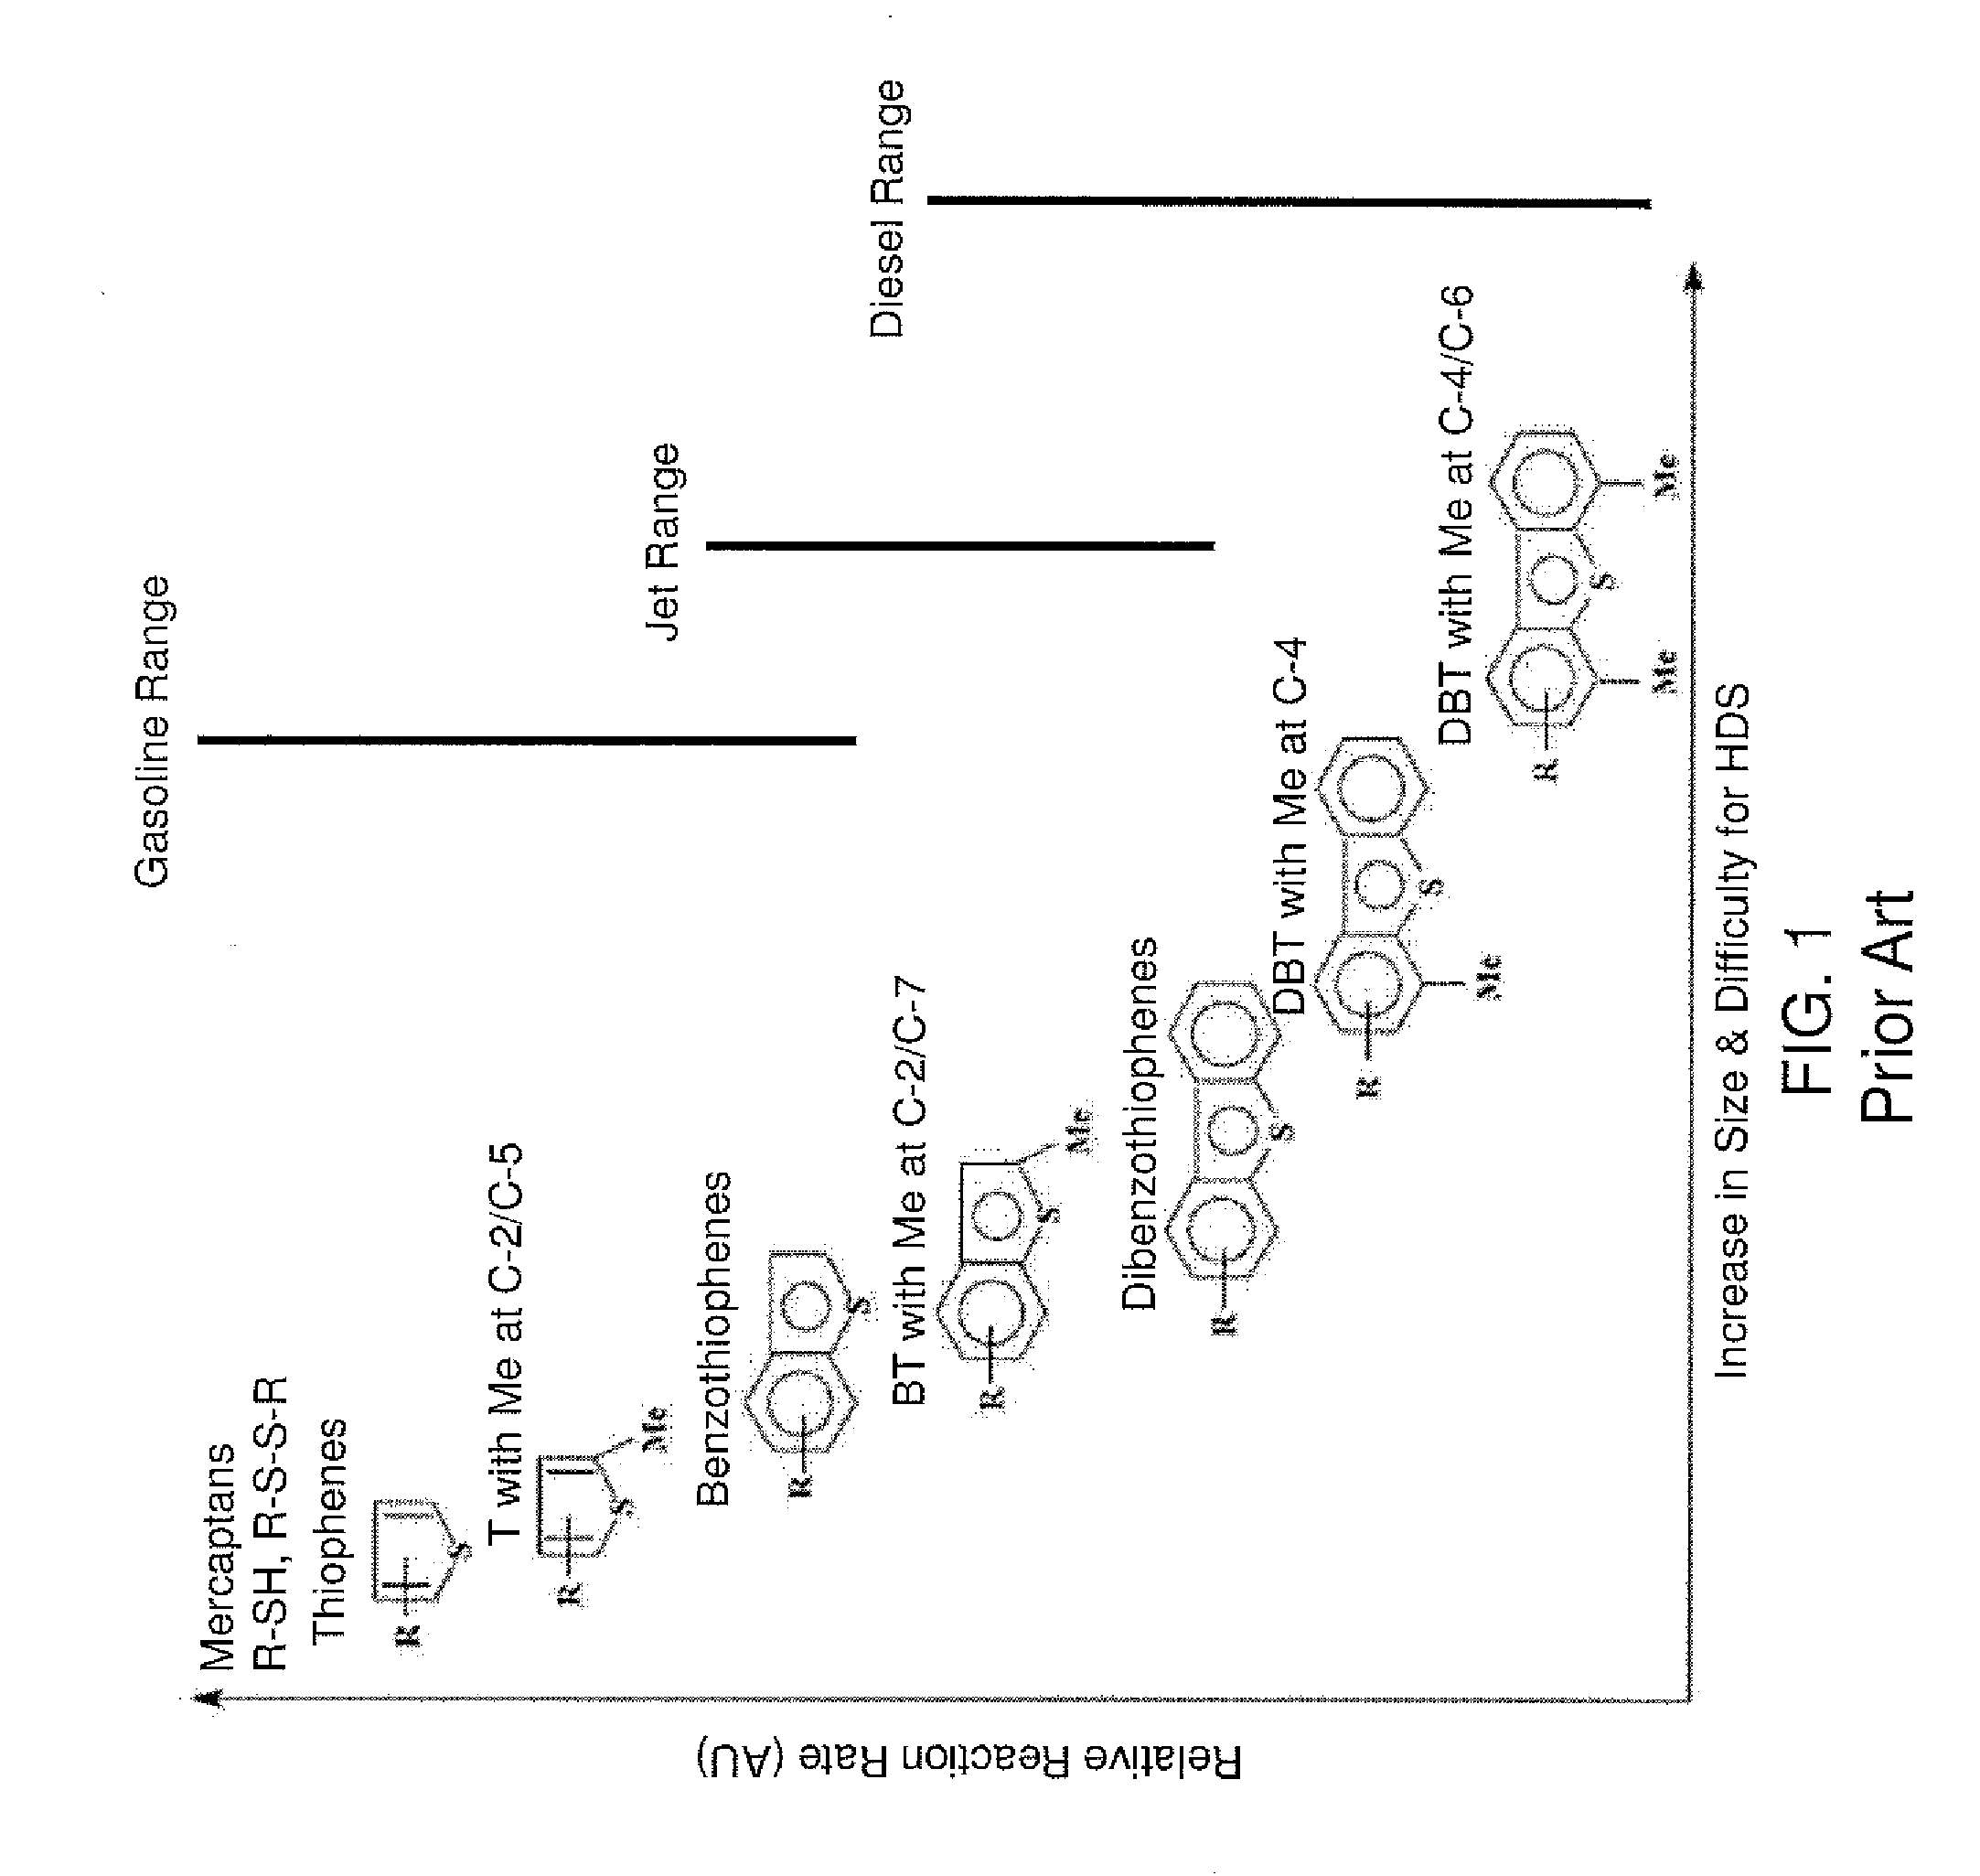 Integrated hydrotreating and isomerization process with aromatic separation